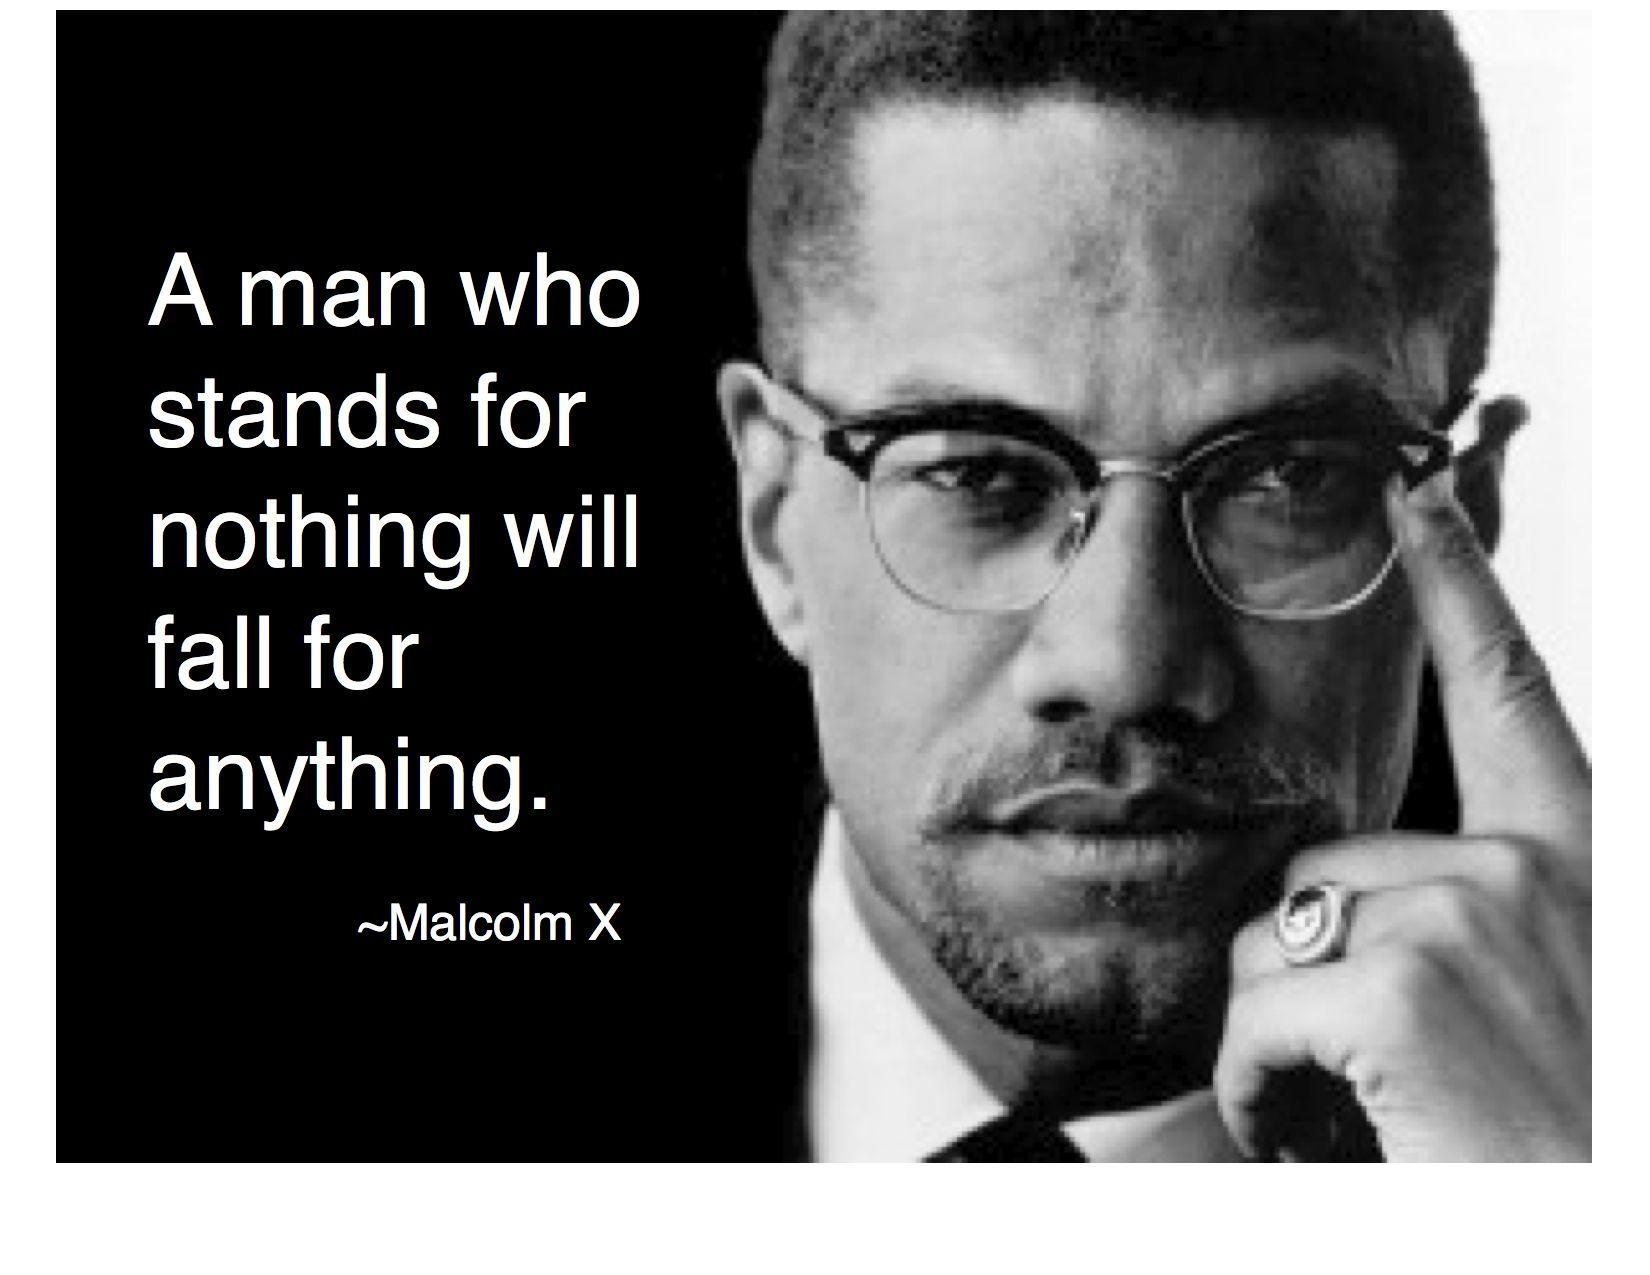 Malcolm X Quotes Gallery